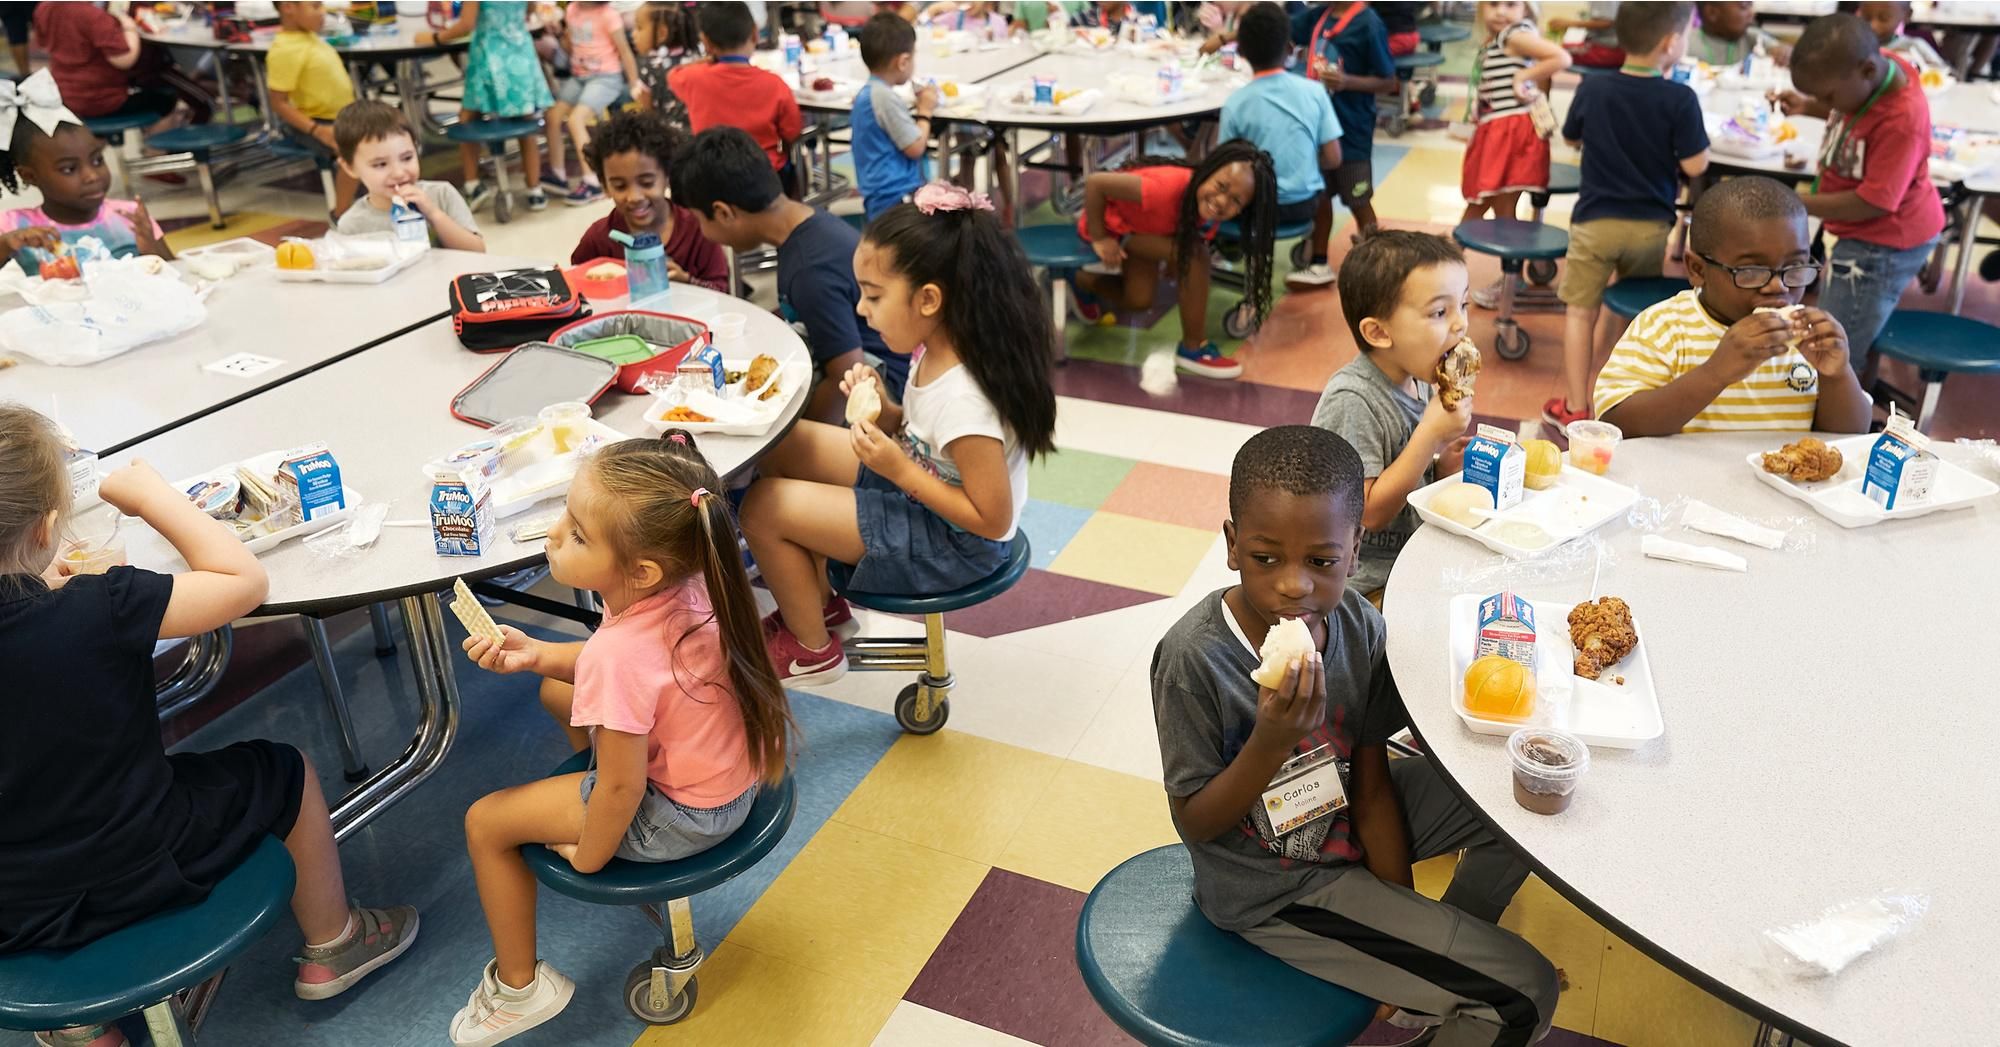 In this pre-pandemic photo, children eat lunch in the cafeteria at East Brainerd Elementary School in Chattanooga, Tennessee on October 2, 2019. (Photo: The Washington Post via Getty Images) 